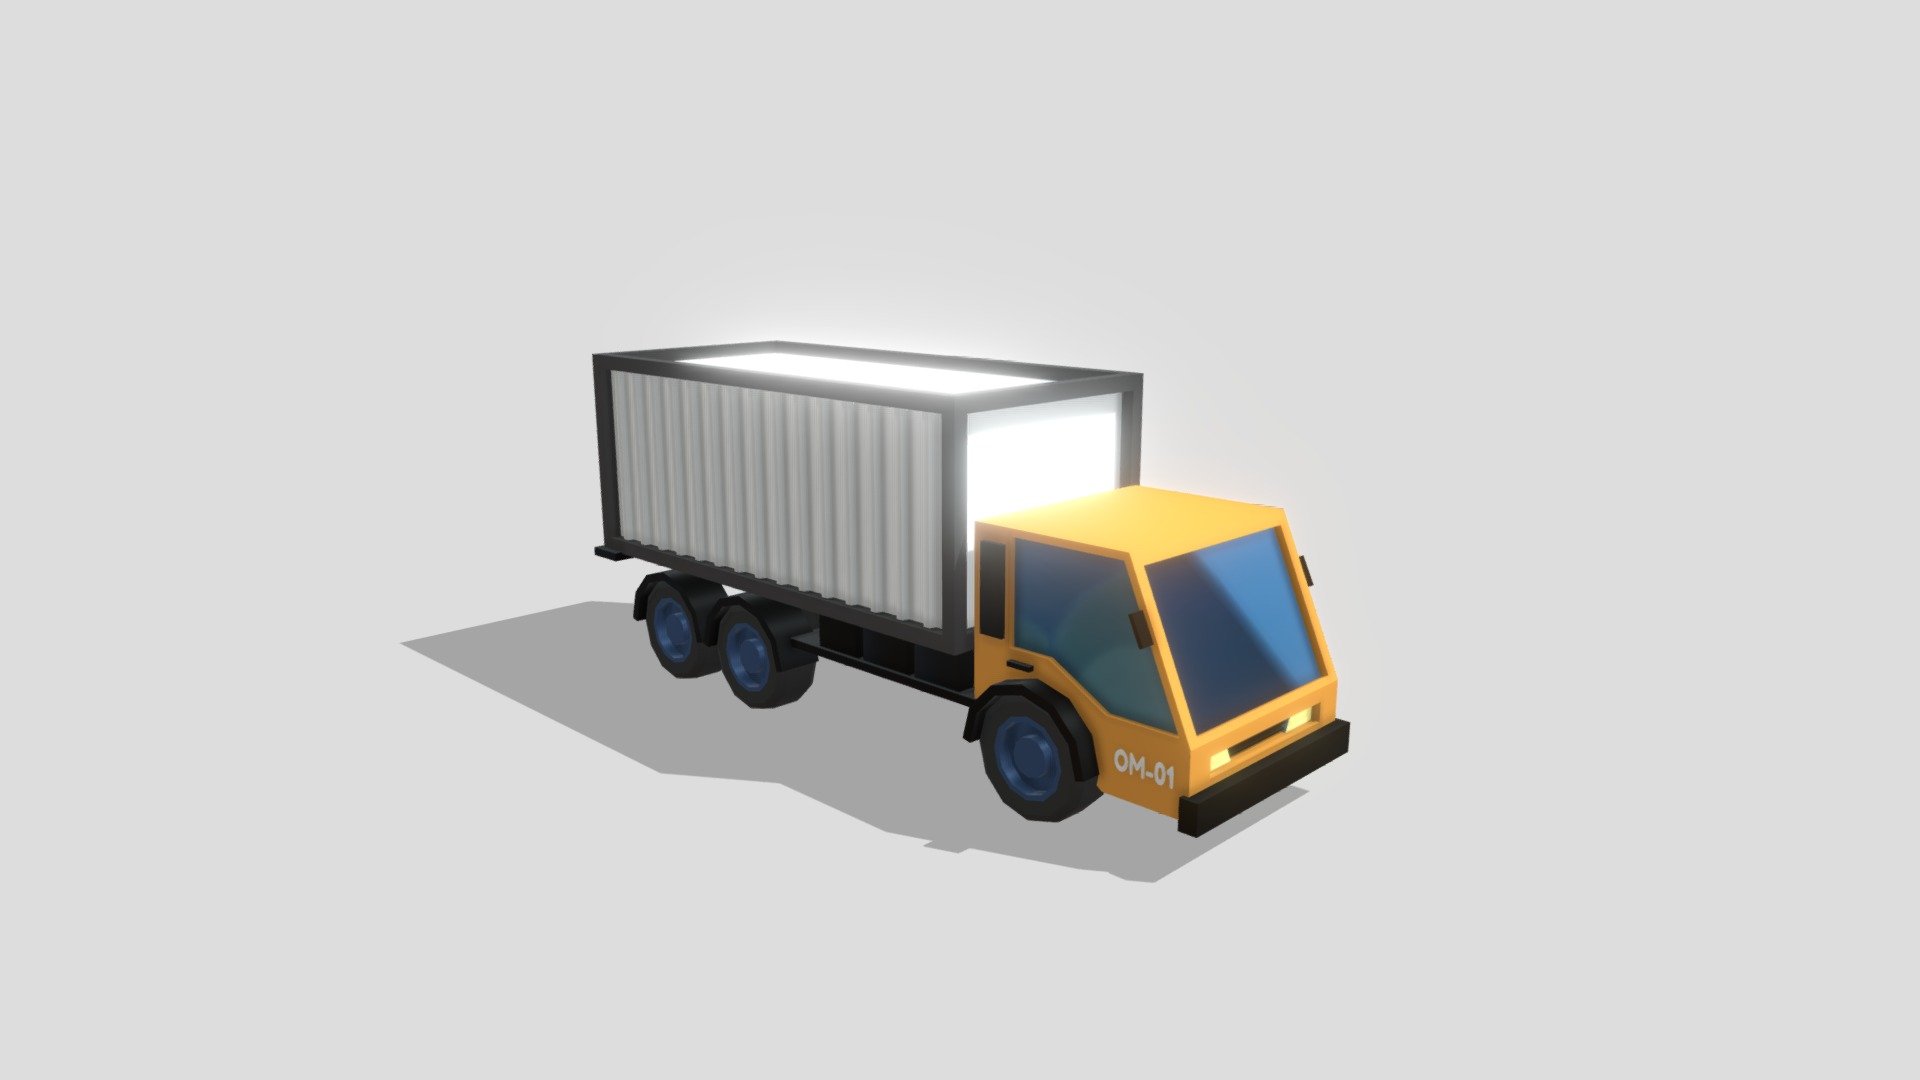 Low Poly Container Truck asset. Change the materials to your liking 3d model